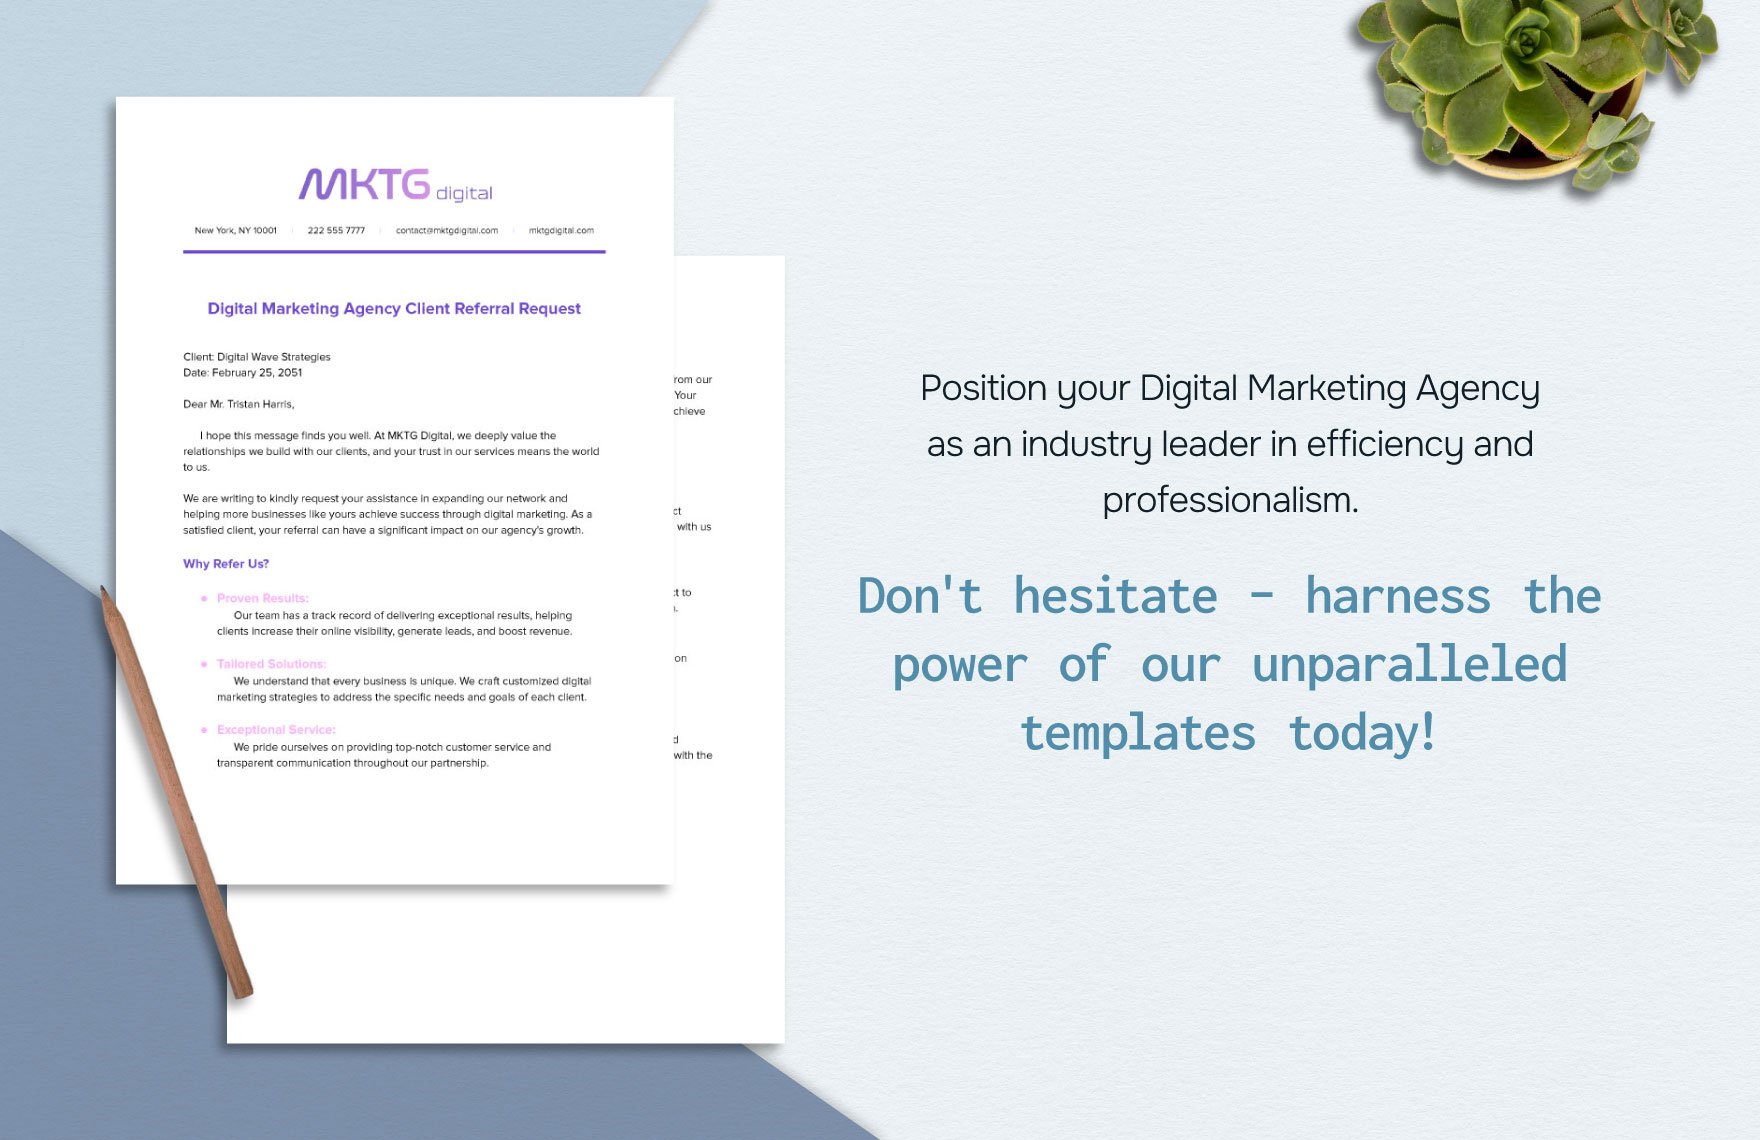 Digital Marketing Agency Client Referral Request Template